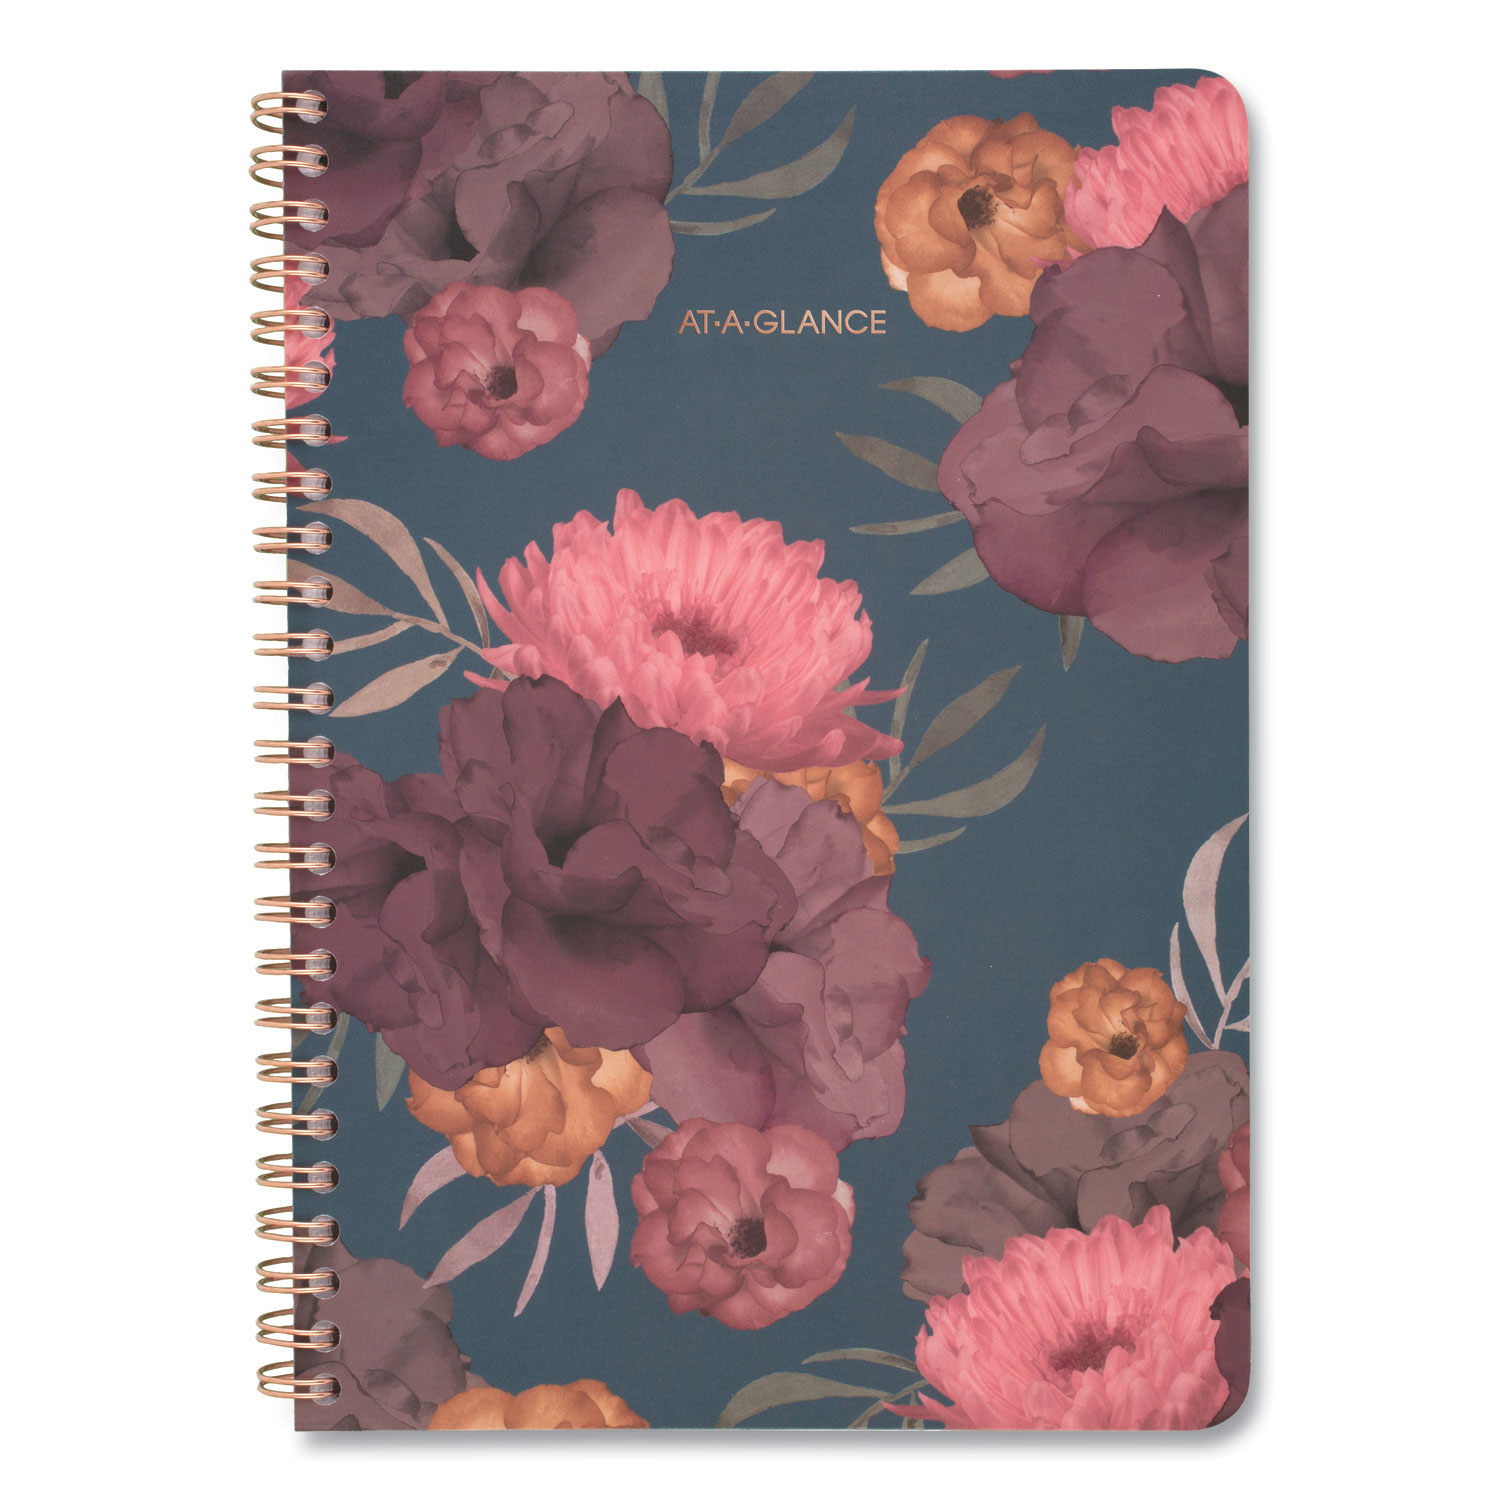  AT-A-GLANCE 5254-200 Dark Romance Weekly/Monthly Planner, 8 1/2 x 5 1/2, Floral, 2020-2021 (AAG5254200) 